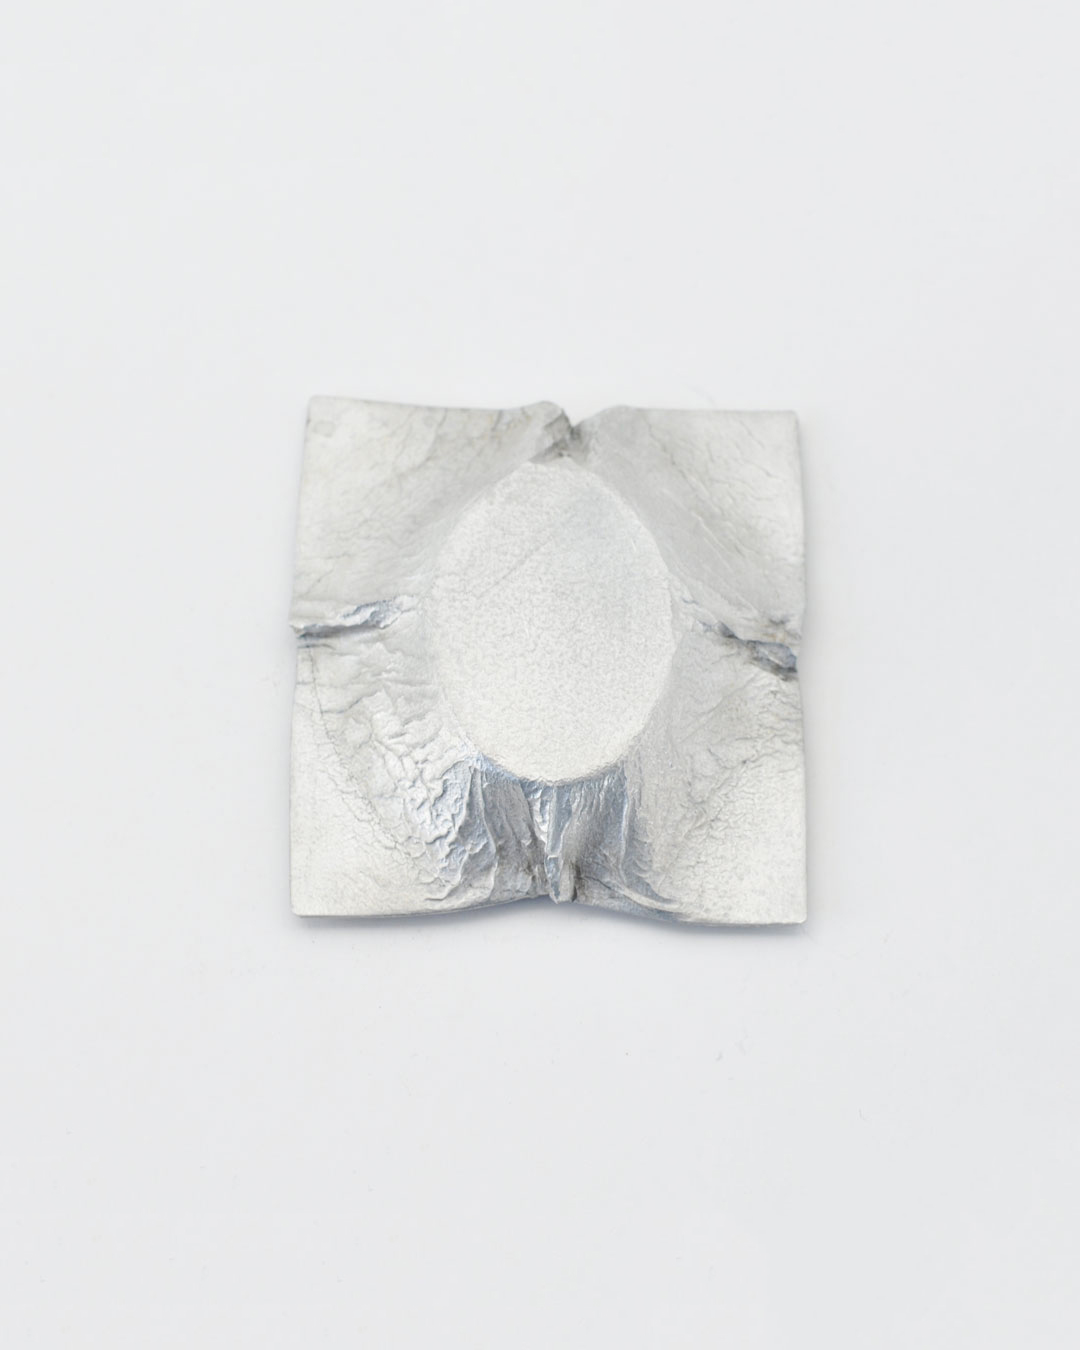 Anders Ljungberg, Intension Large #2, 2019, broche; aluminium, staal, 91 x 84 x 20 mm, €550